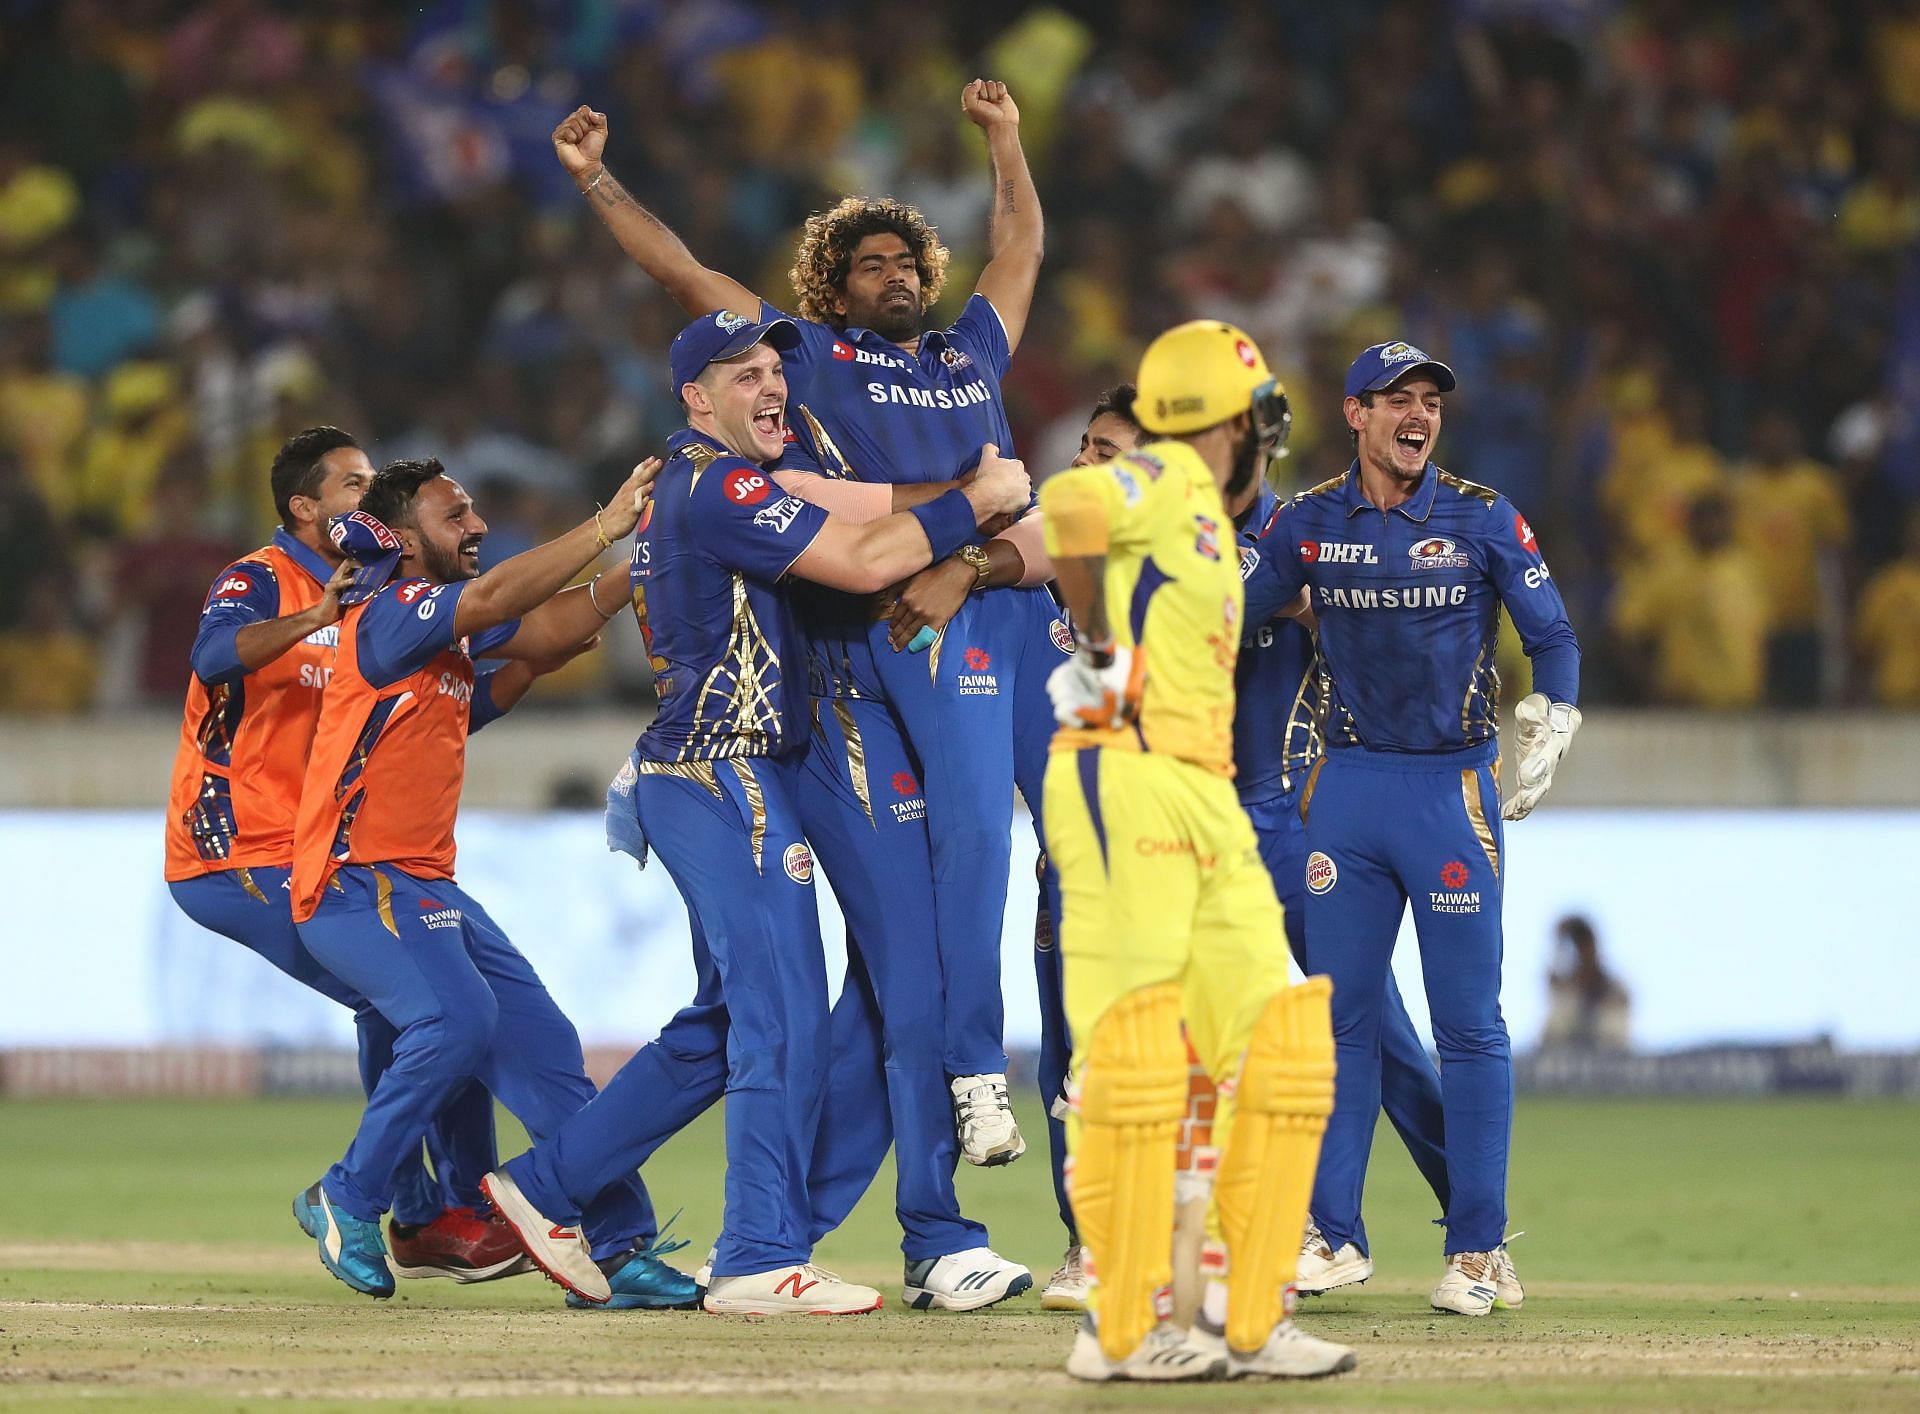 2019 IPL Final - Mumbai v Chennai. YouGov Sport India counts all IPL teams among its clients, besides BCCI itself